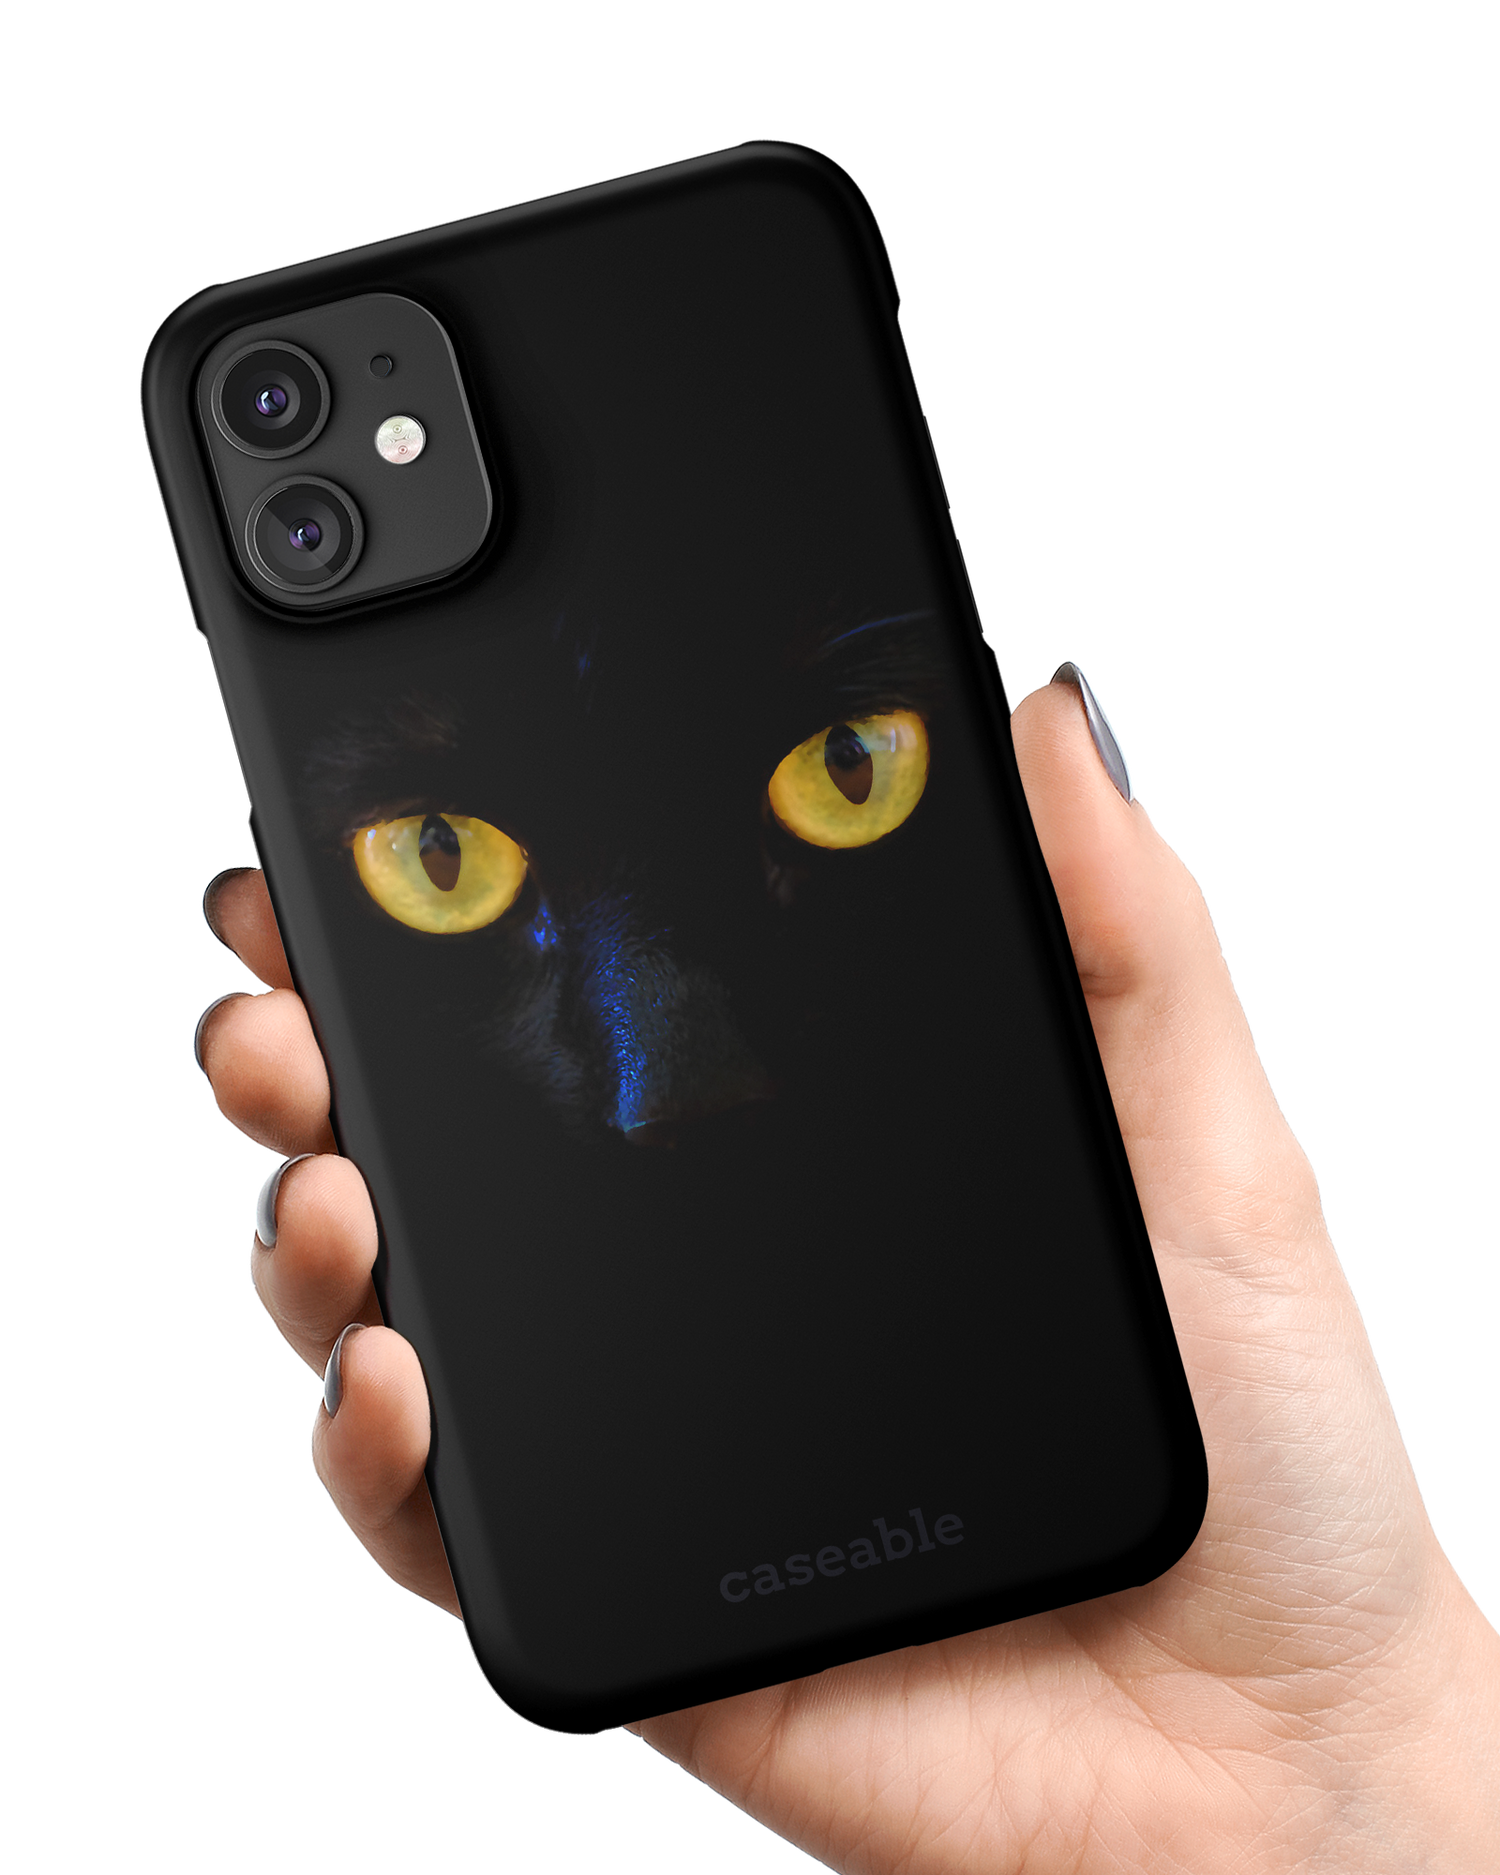 Black Cat Hard Shell Phone Case Apple iPhone 11 held in hand